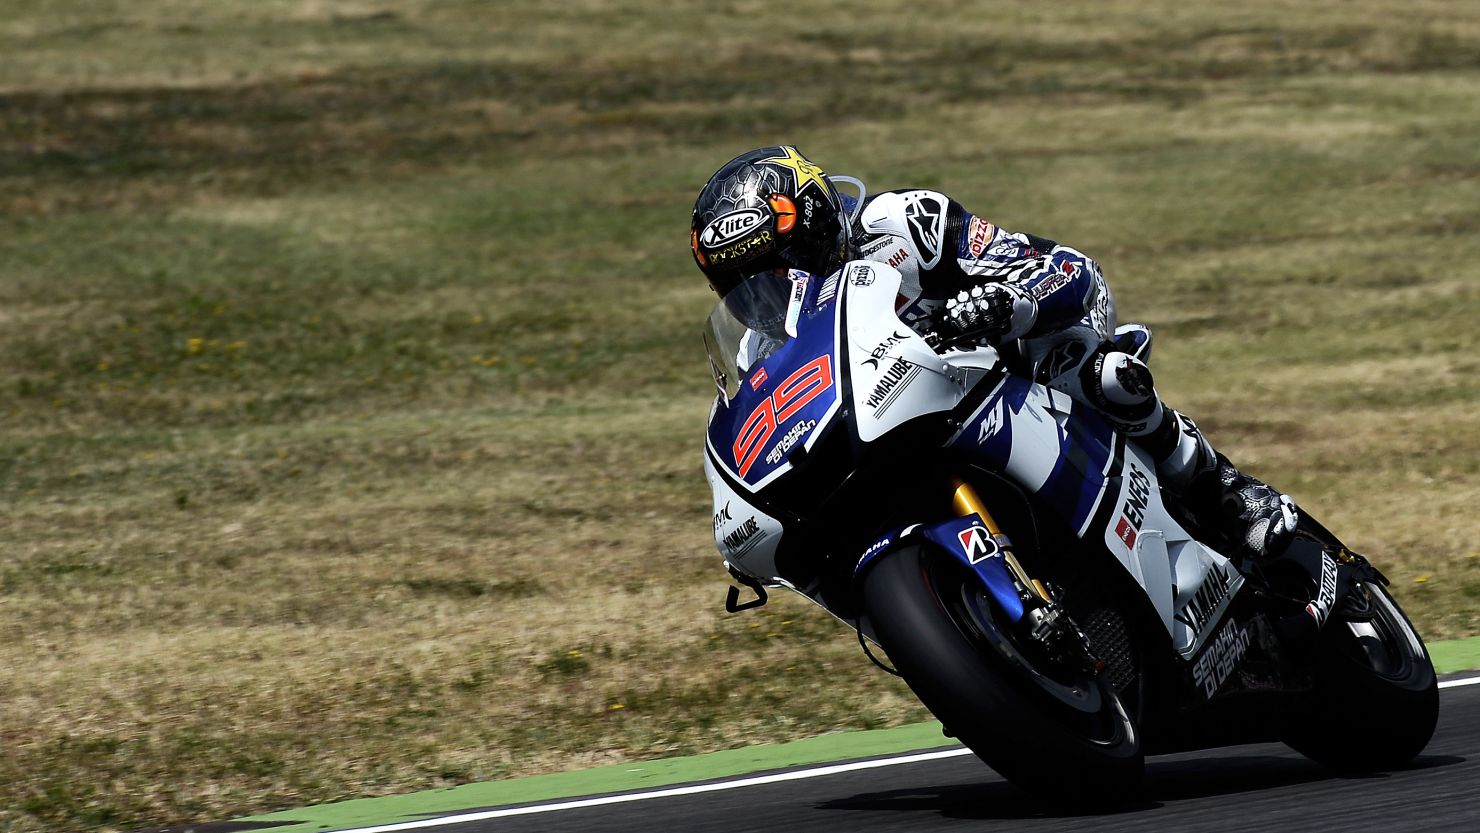 The 2010 world champion coasted to victory at the Mugello Circuit on Sunday to extend his championship lead to 19 points